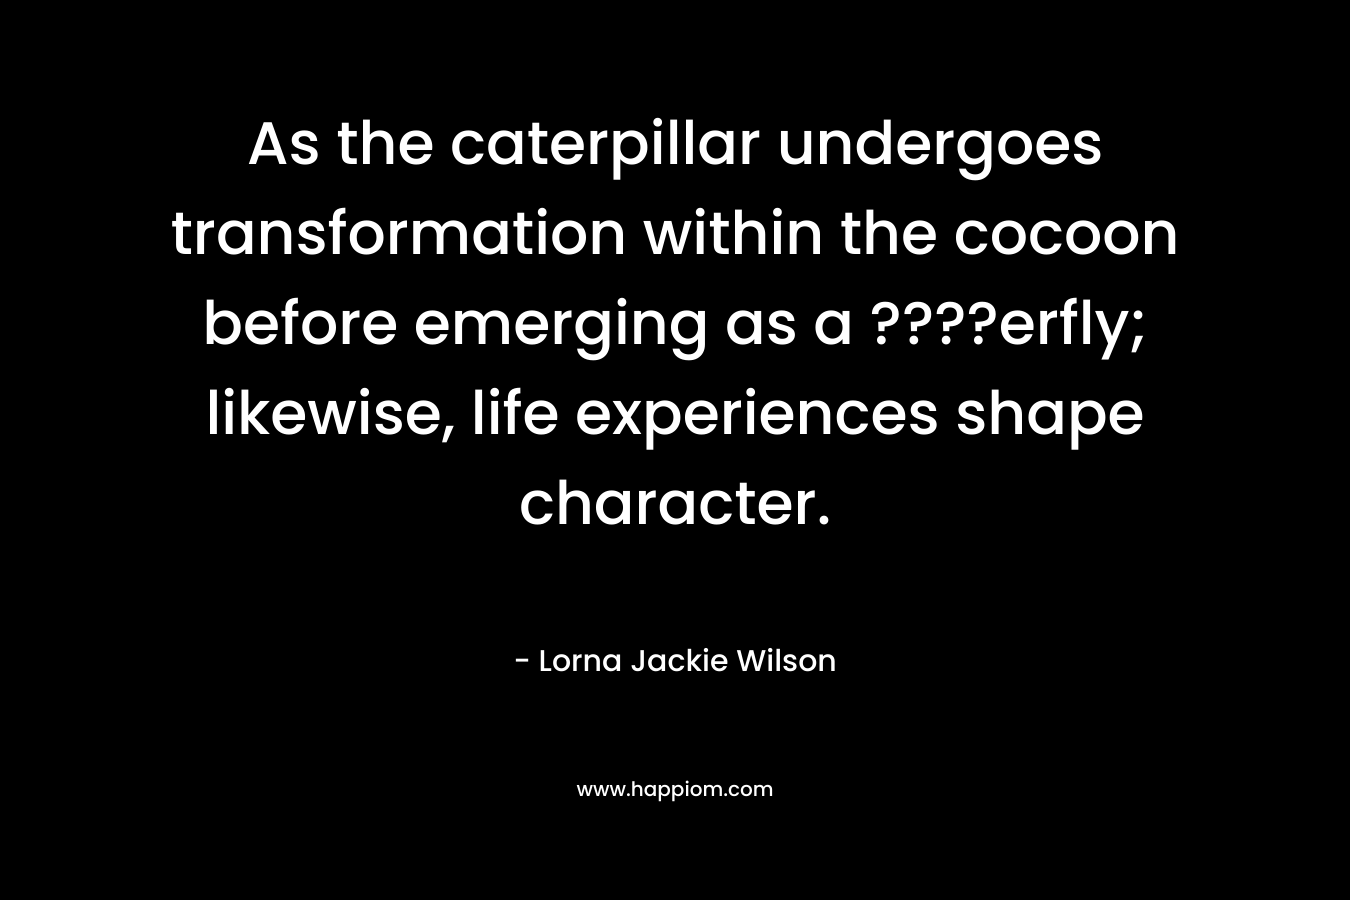 As the caterpillar undergoes transformation within the cocoon before emerging as a ????erfly; likewise, life experiences shape character. – Lorna Jackie Wilson